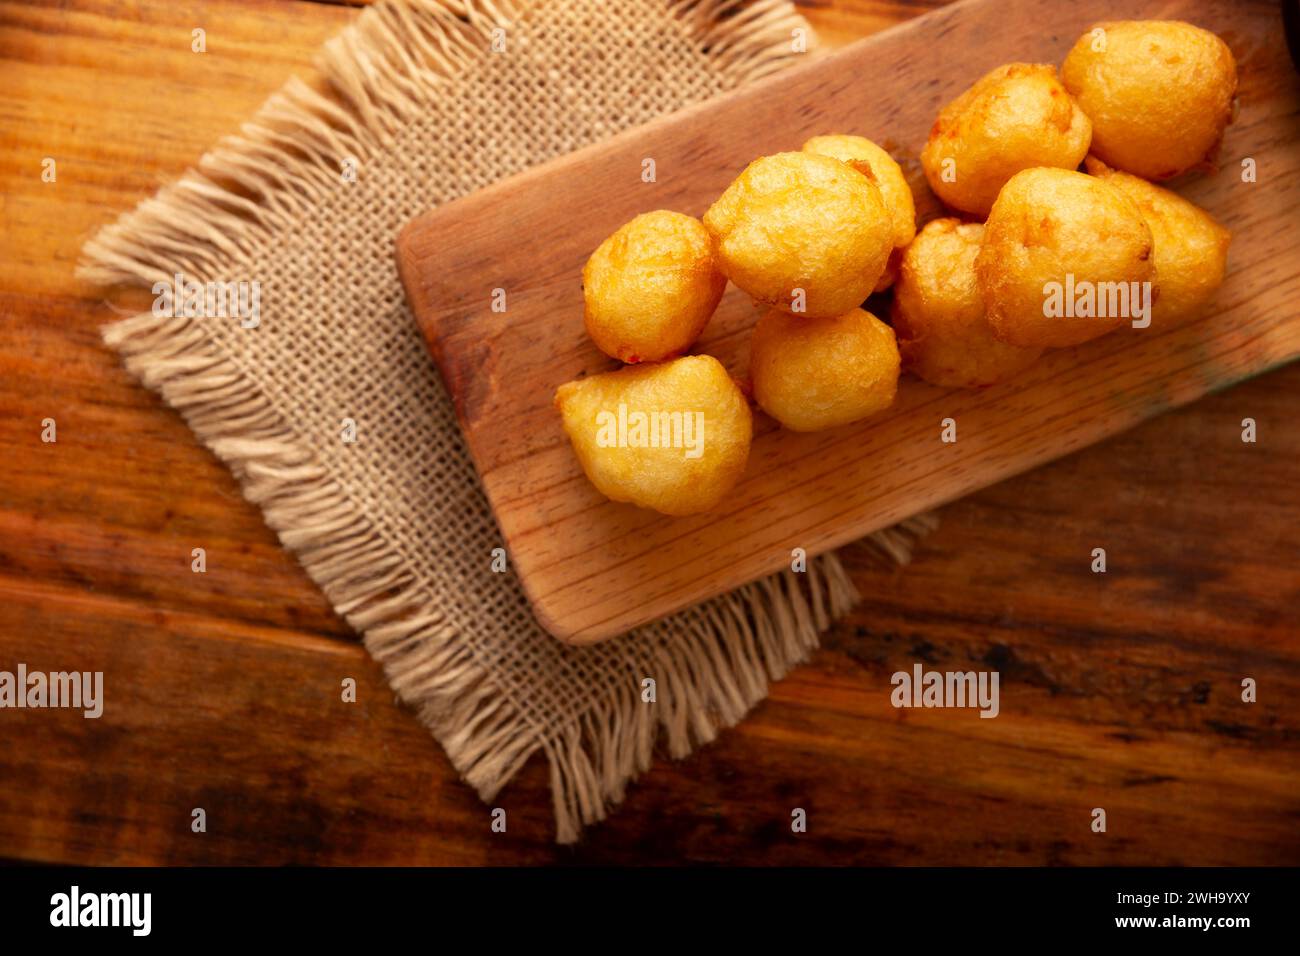 Fried breaded cheese balls, easy and delicious homemade snack recipe. Stock Photo